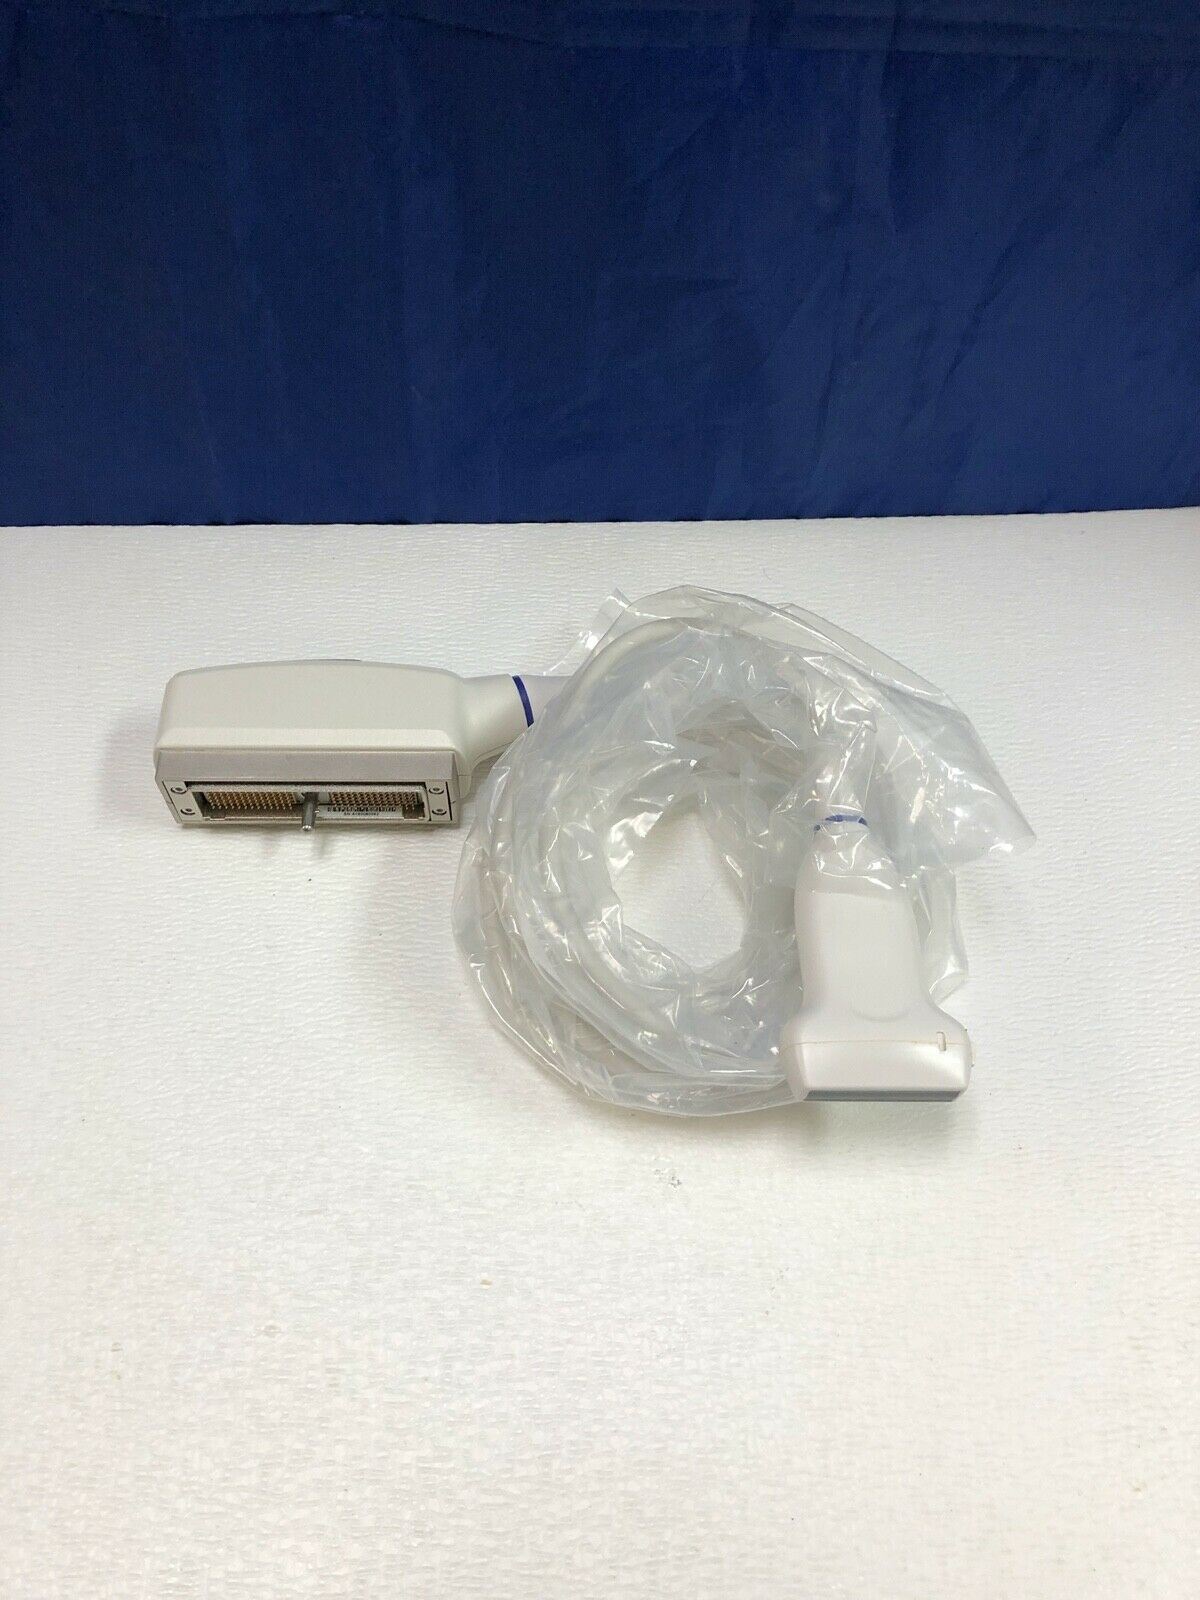 SonoScape Transducer L745 Linear Array Probe for A series ultrasounds DIAGNOSTIC ULTRASOUND MACHINES FOR SALE